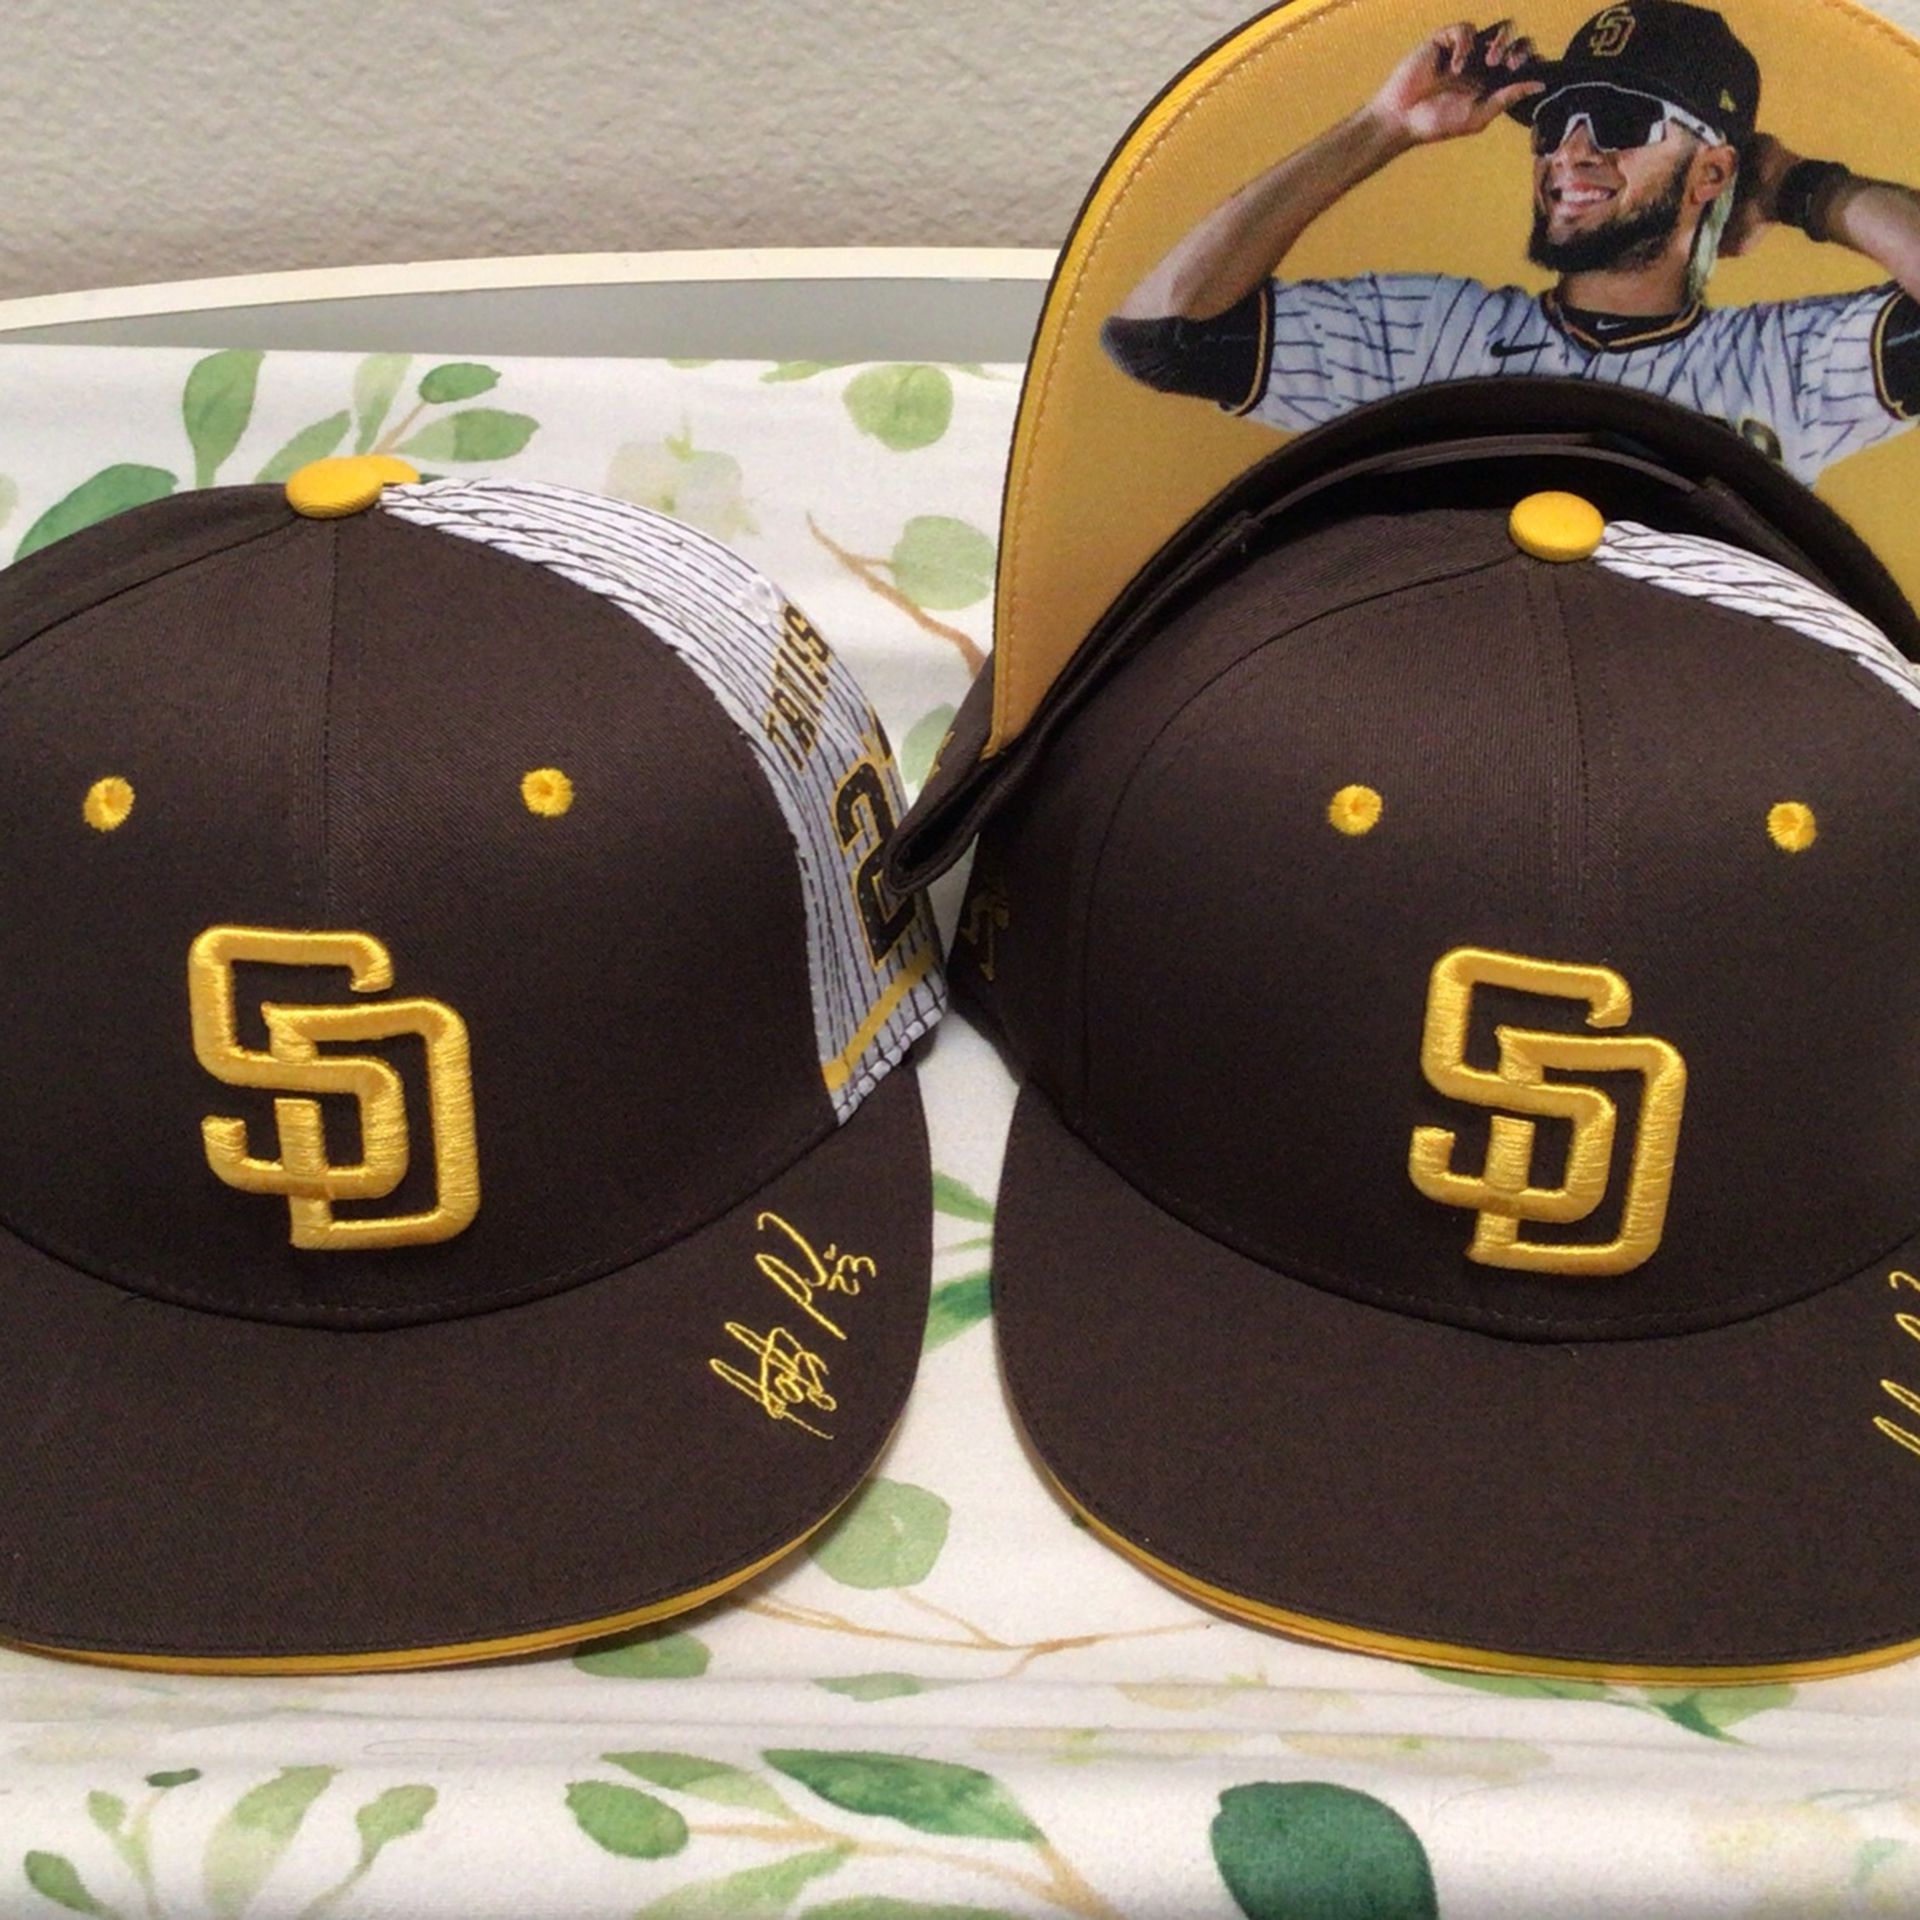 San Diego Padres (Tatis Jr. Theme Game Hat) Limited Edition “Snap Back Fit”